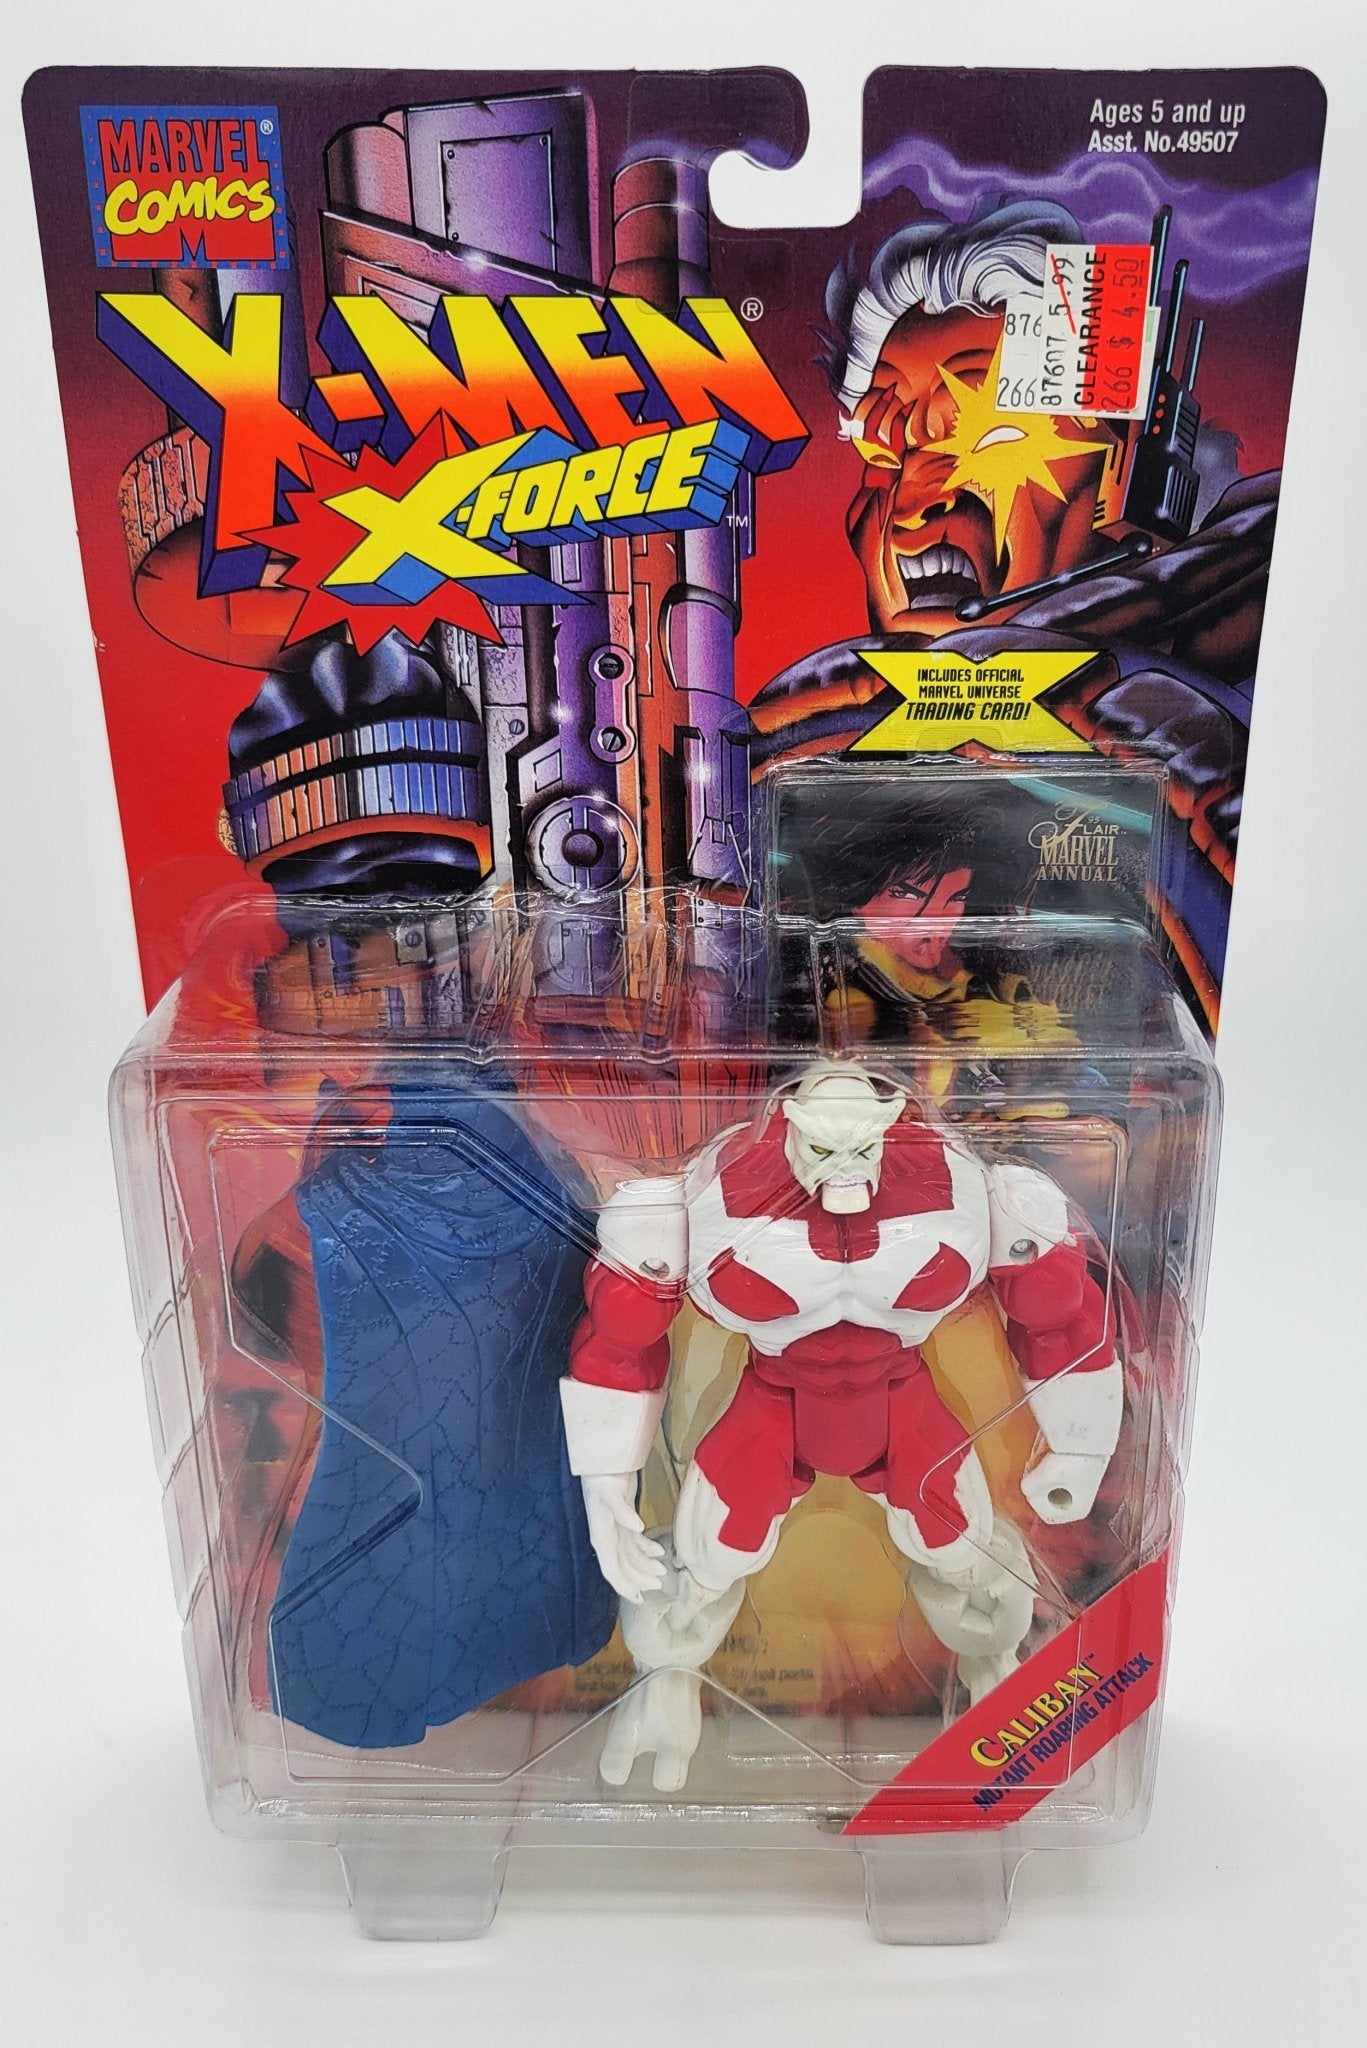 Toy Biz - Toy Biz | X-Men X-Force Caliban with Collectable Card | Vintage Marvel Action Figure - Action Figures - Steady Bunny Shop